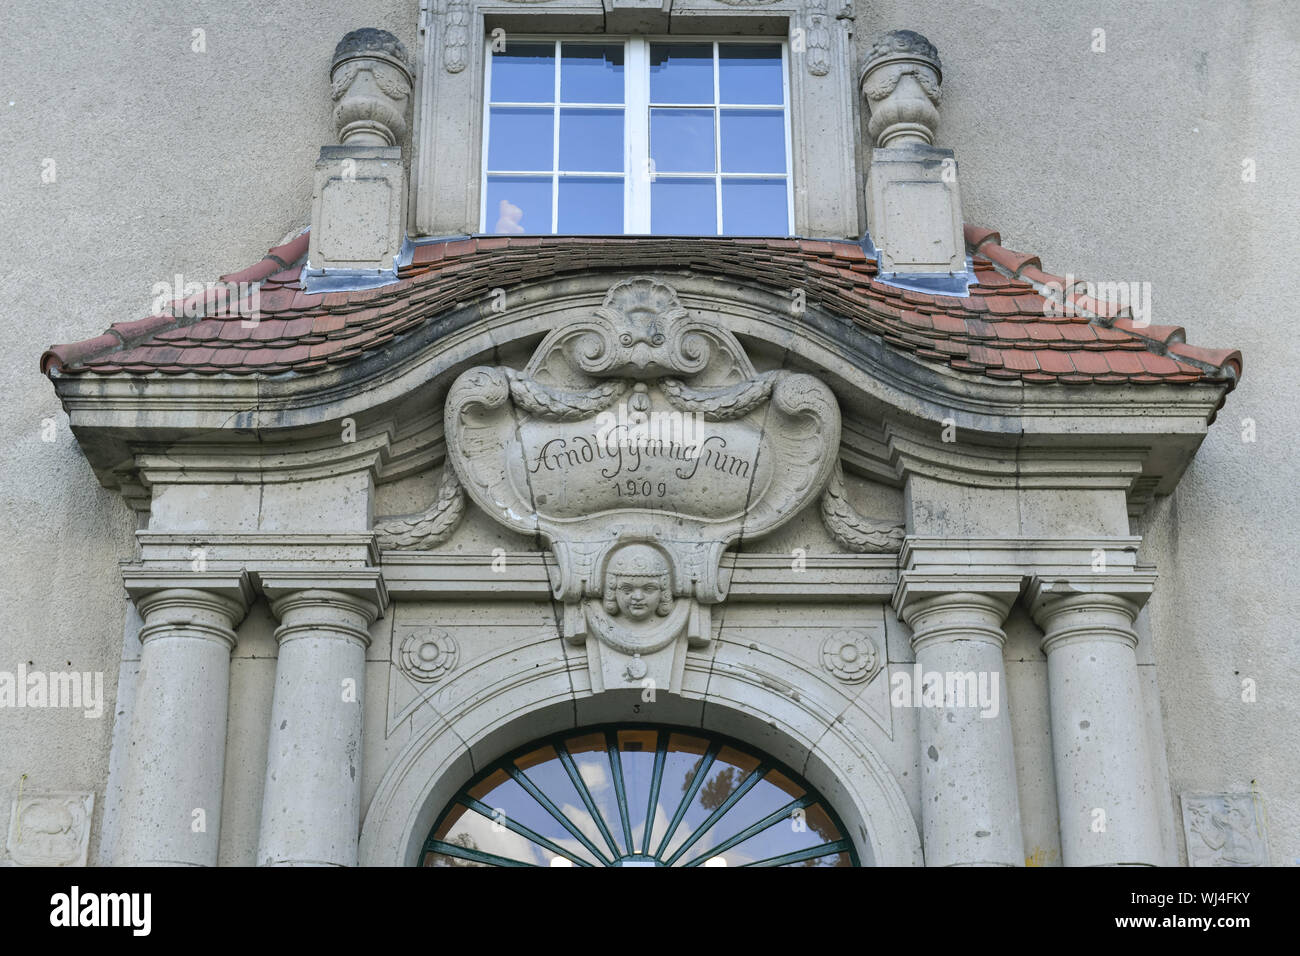 AGD, view, architecture, Arndt high school, Outside, Outside, outside view, outside view, Berlin, Dahlem, Dahlem village, Dahlemer, Germany, building, Stock Photo